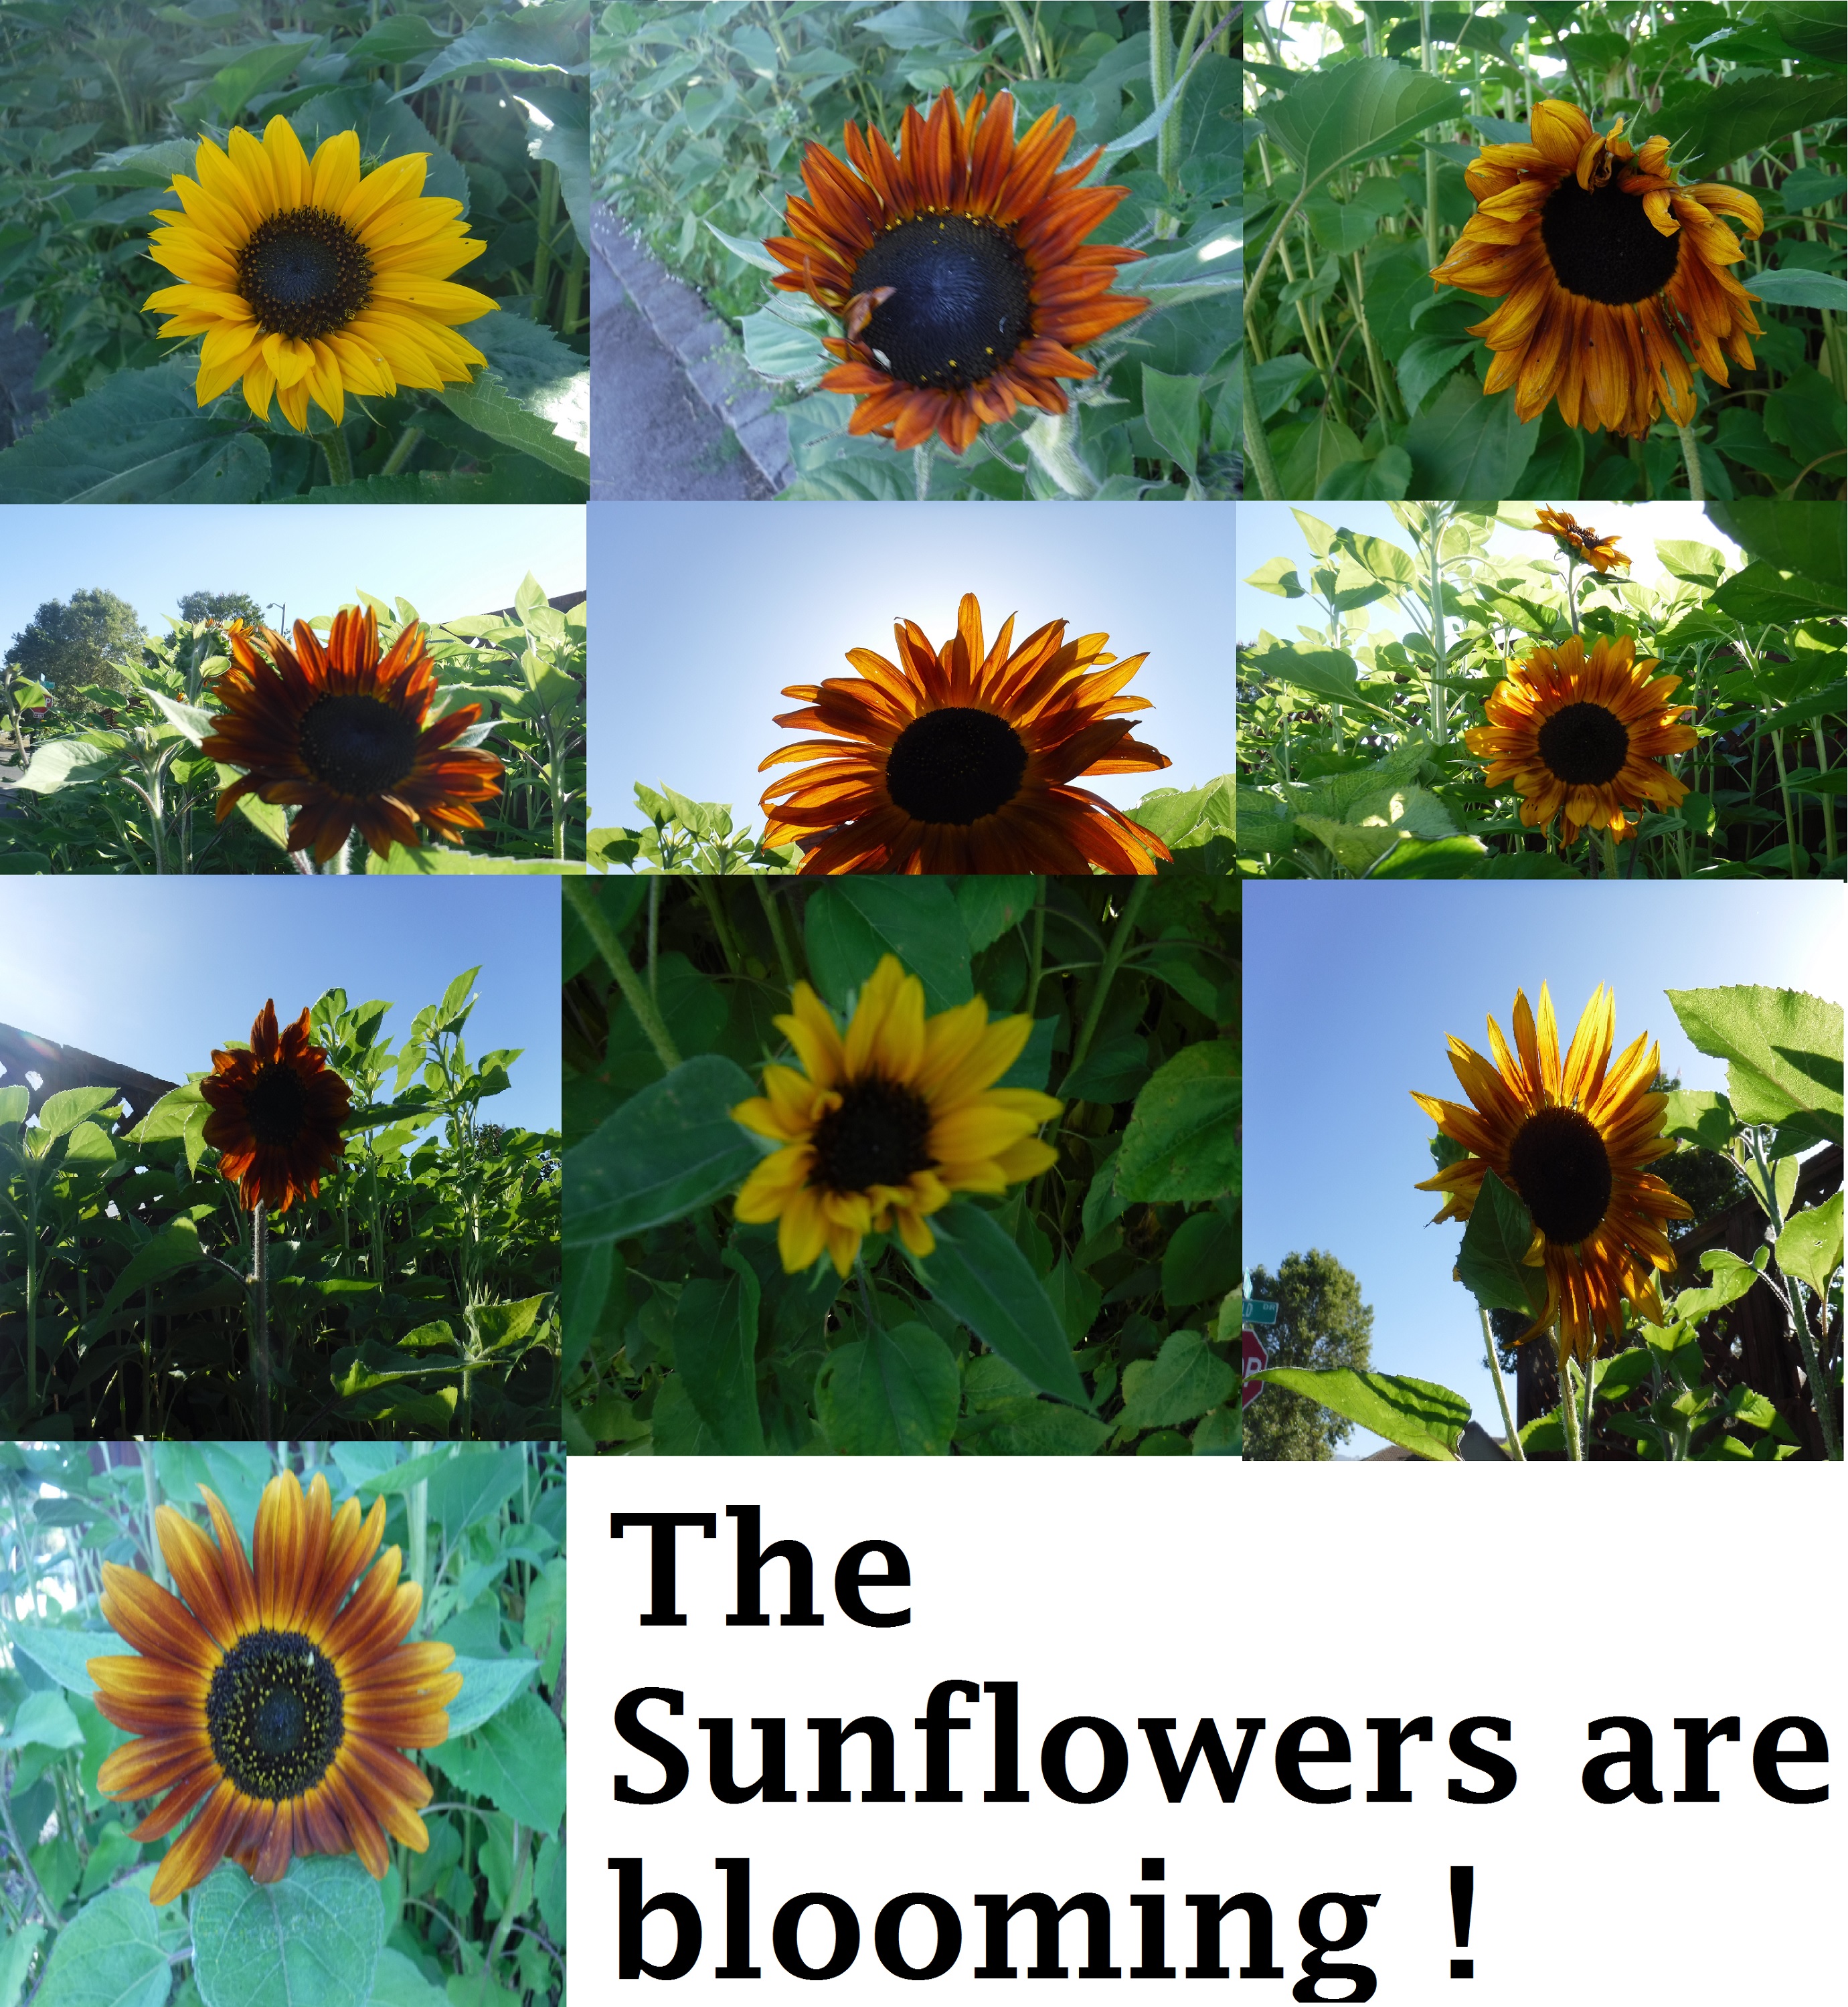 Photos I took of the neighbor's sunflowers and made into a collage